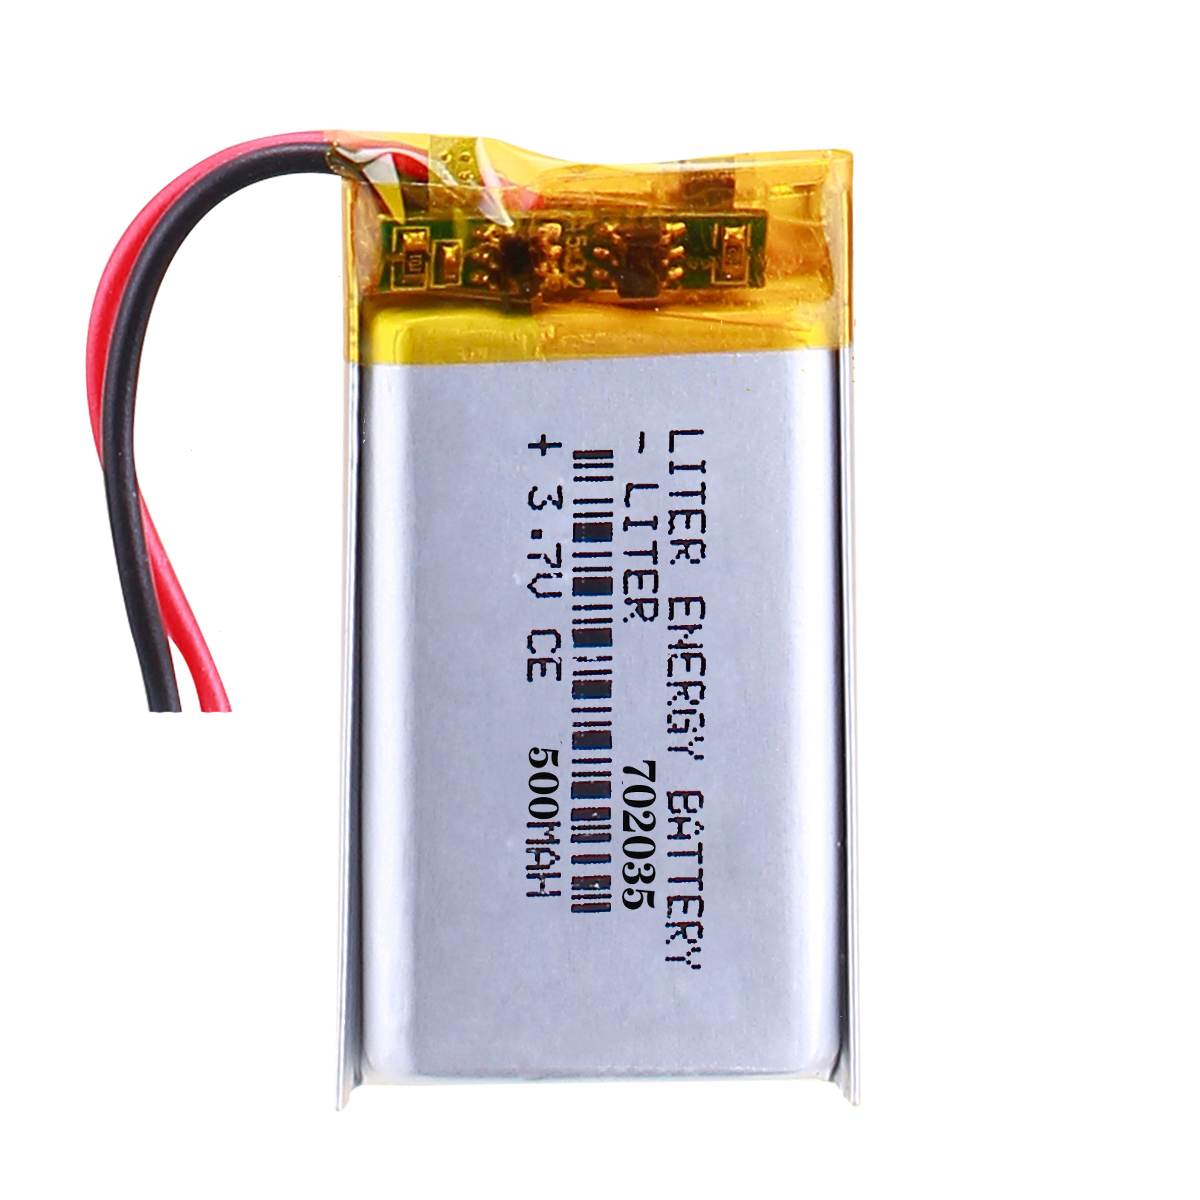 3.7V Rechargeable Hot Selling LiPo Batteries 702035 500mAh 1.85Wh